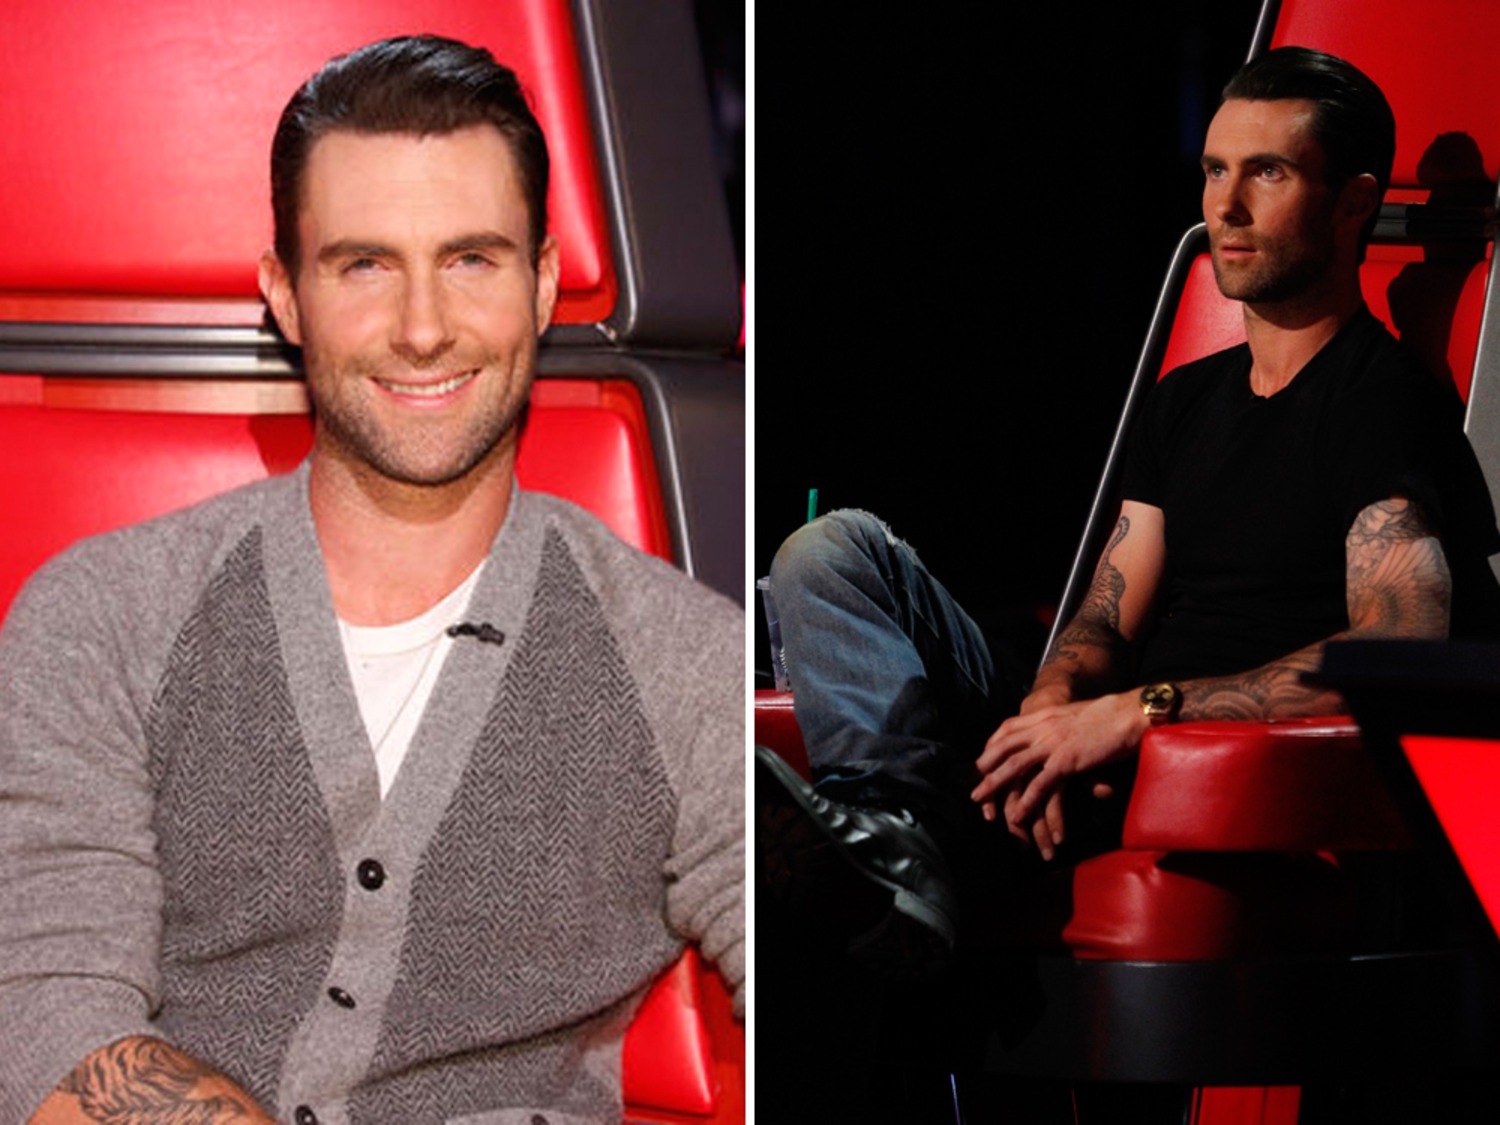 Nerdy' Adam Levine changes outfits during 'The Voice'